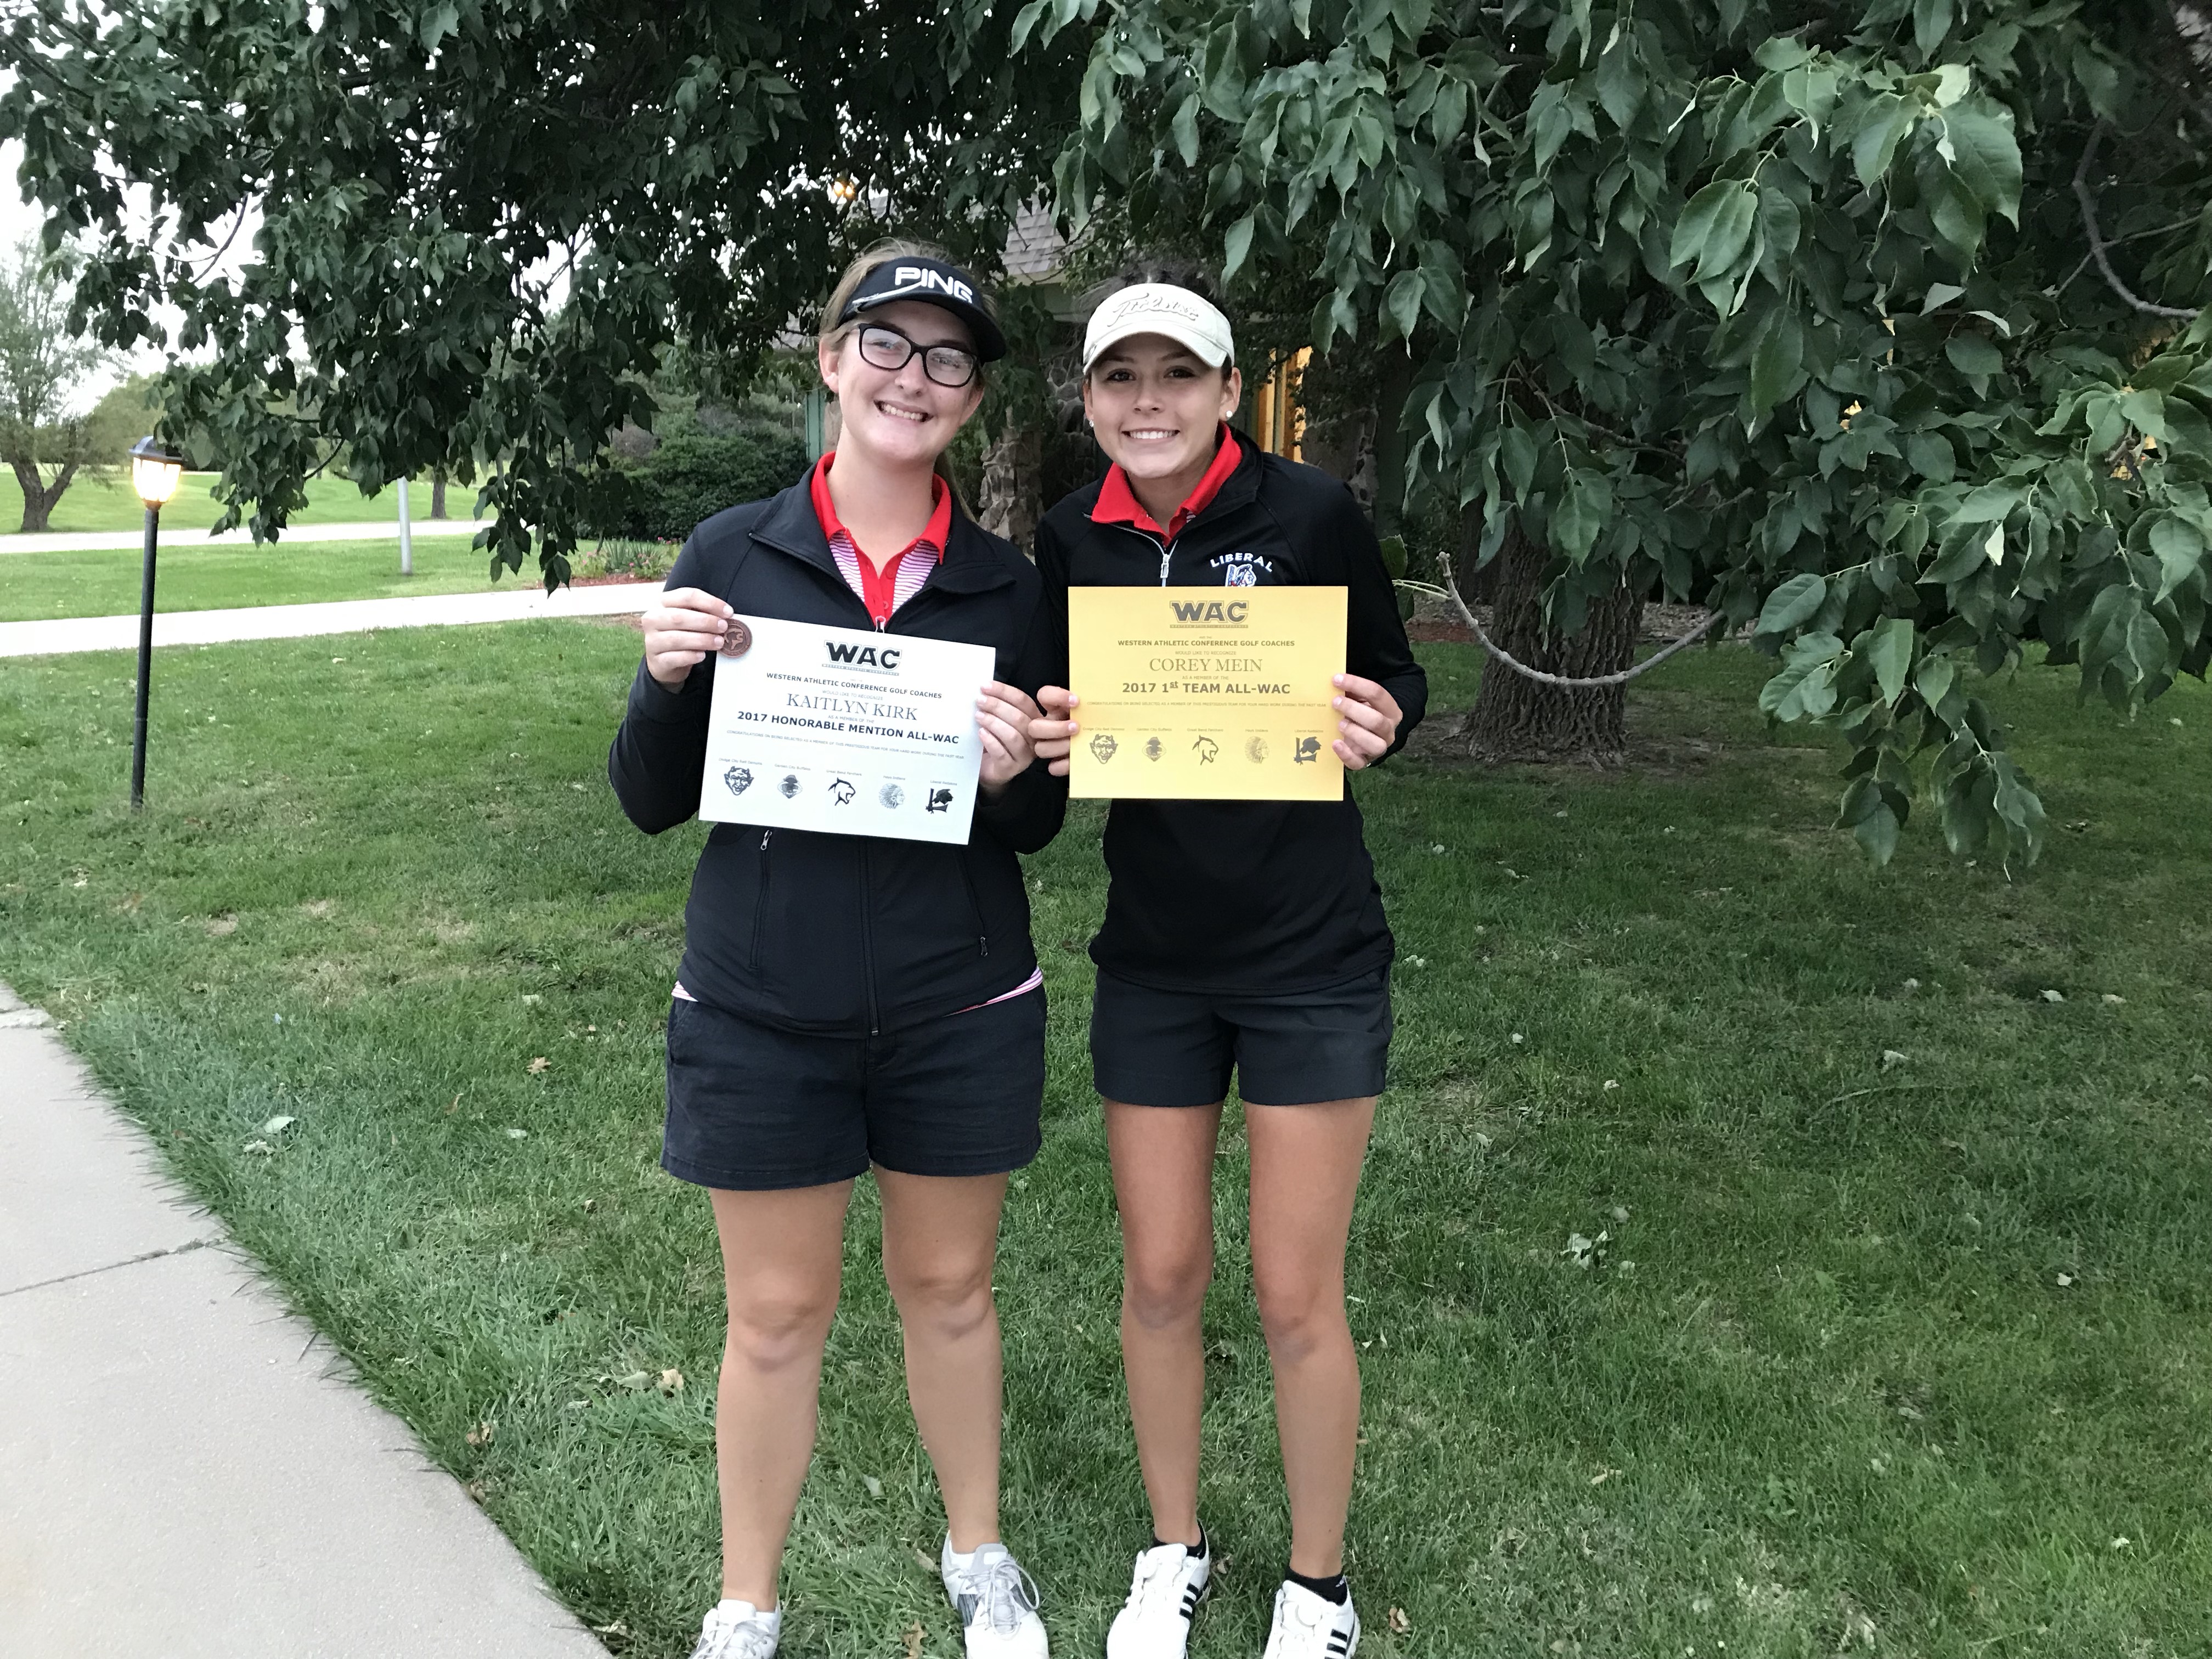 Mein and Kirk Finish in Top 10 at Great Bend